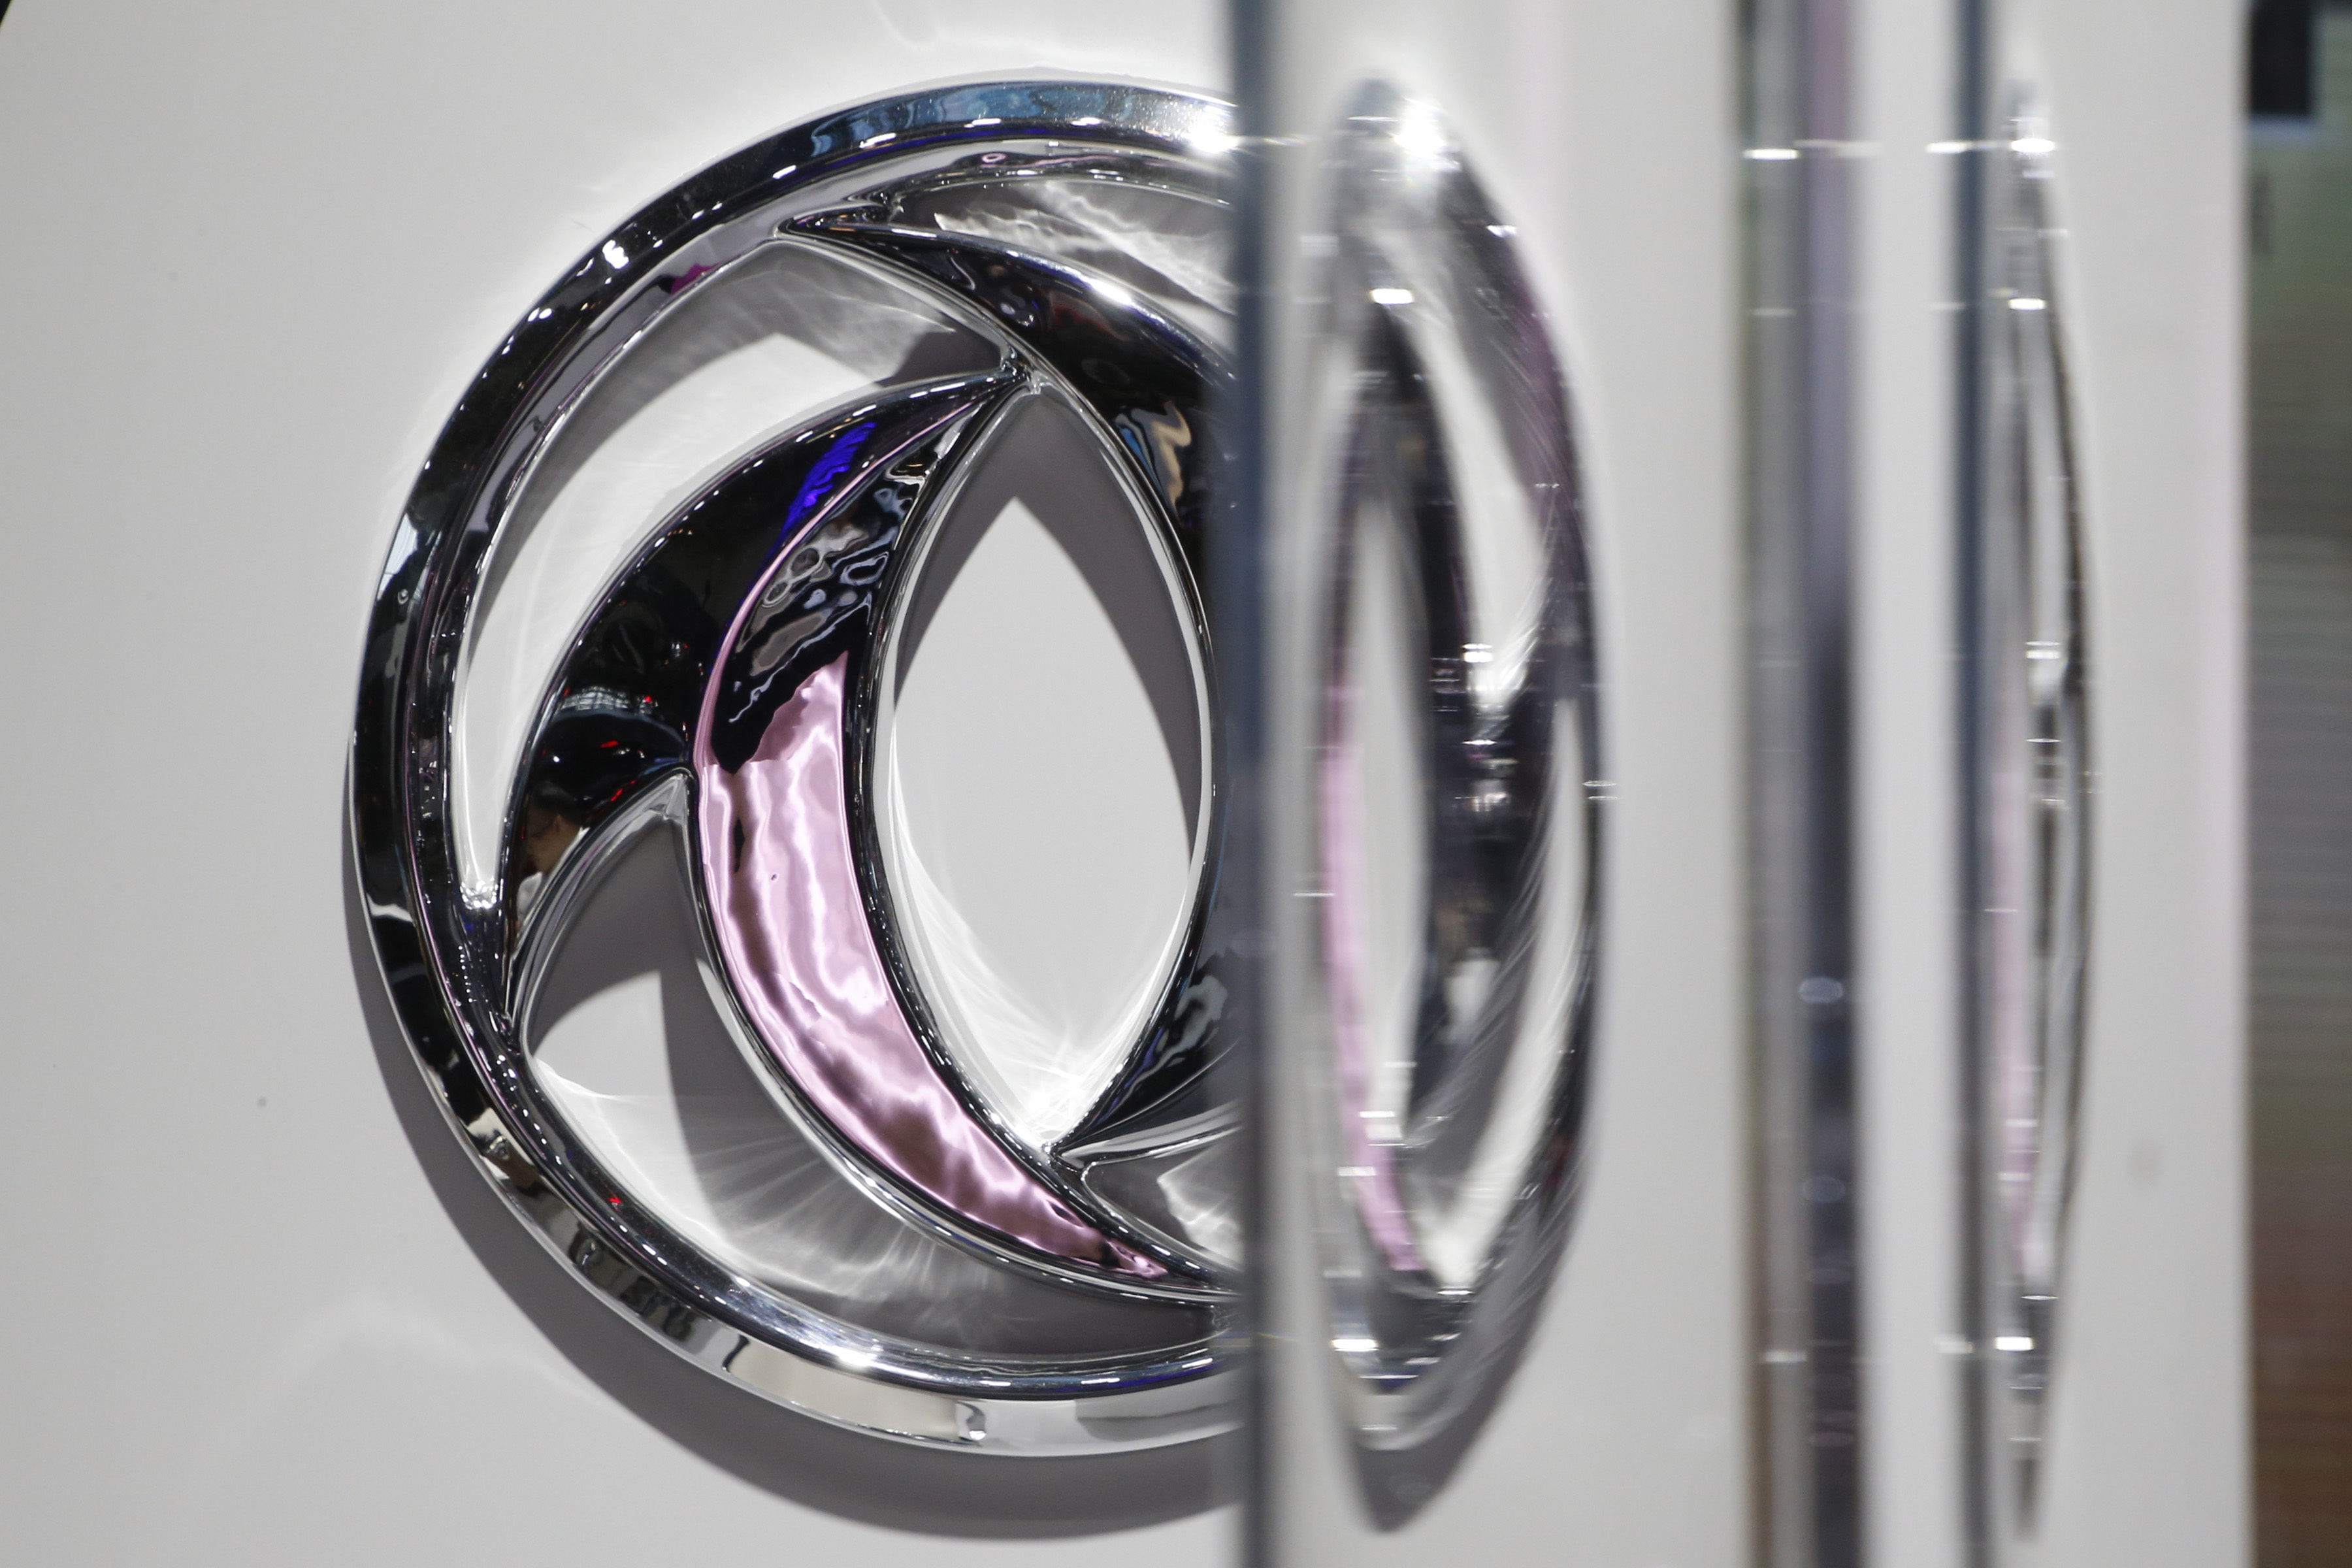 The logo of Dongfeng Motor Corp is seen behind glass door at the Auto China 2016 auto show in Beijing